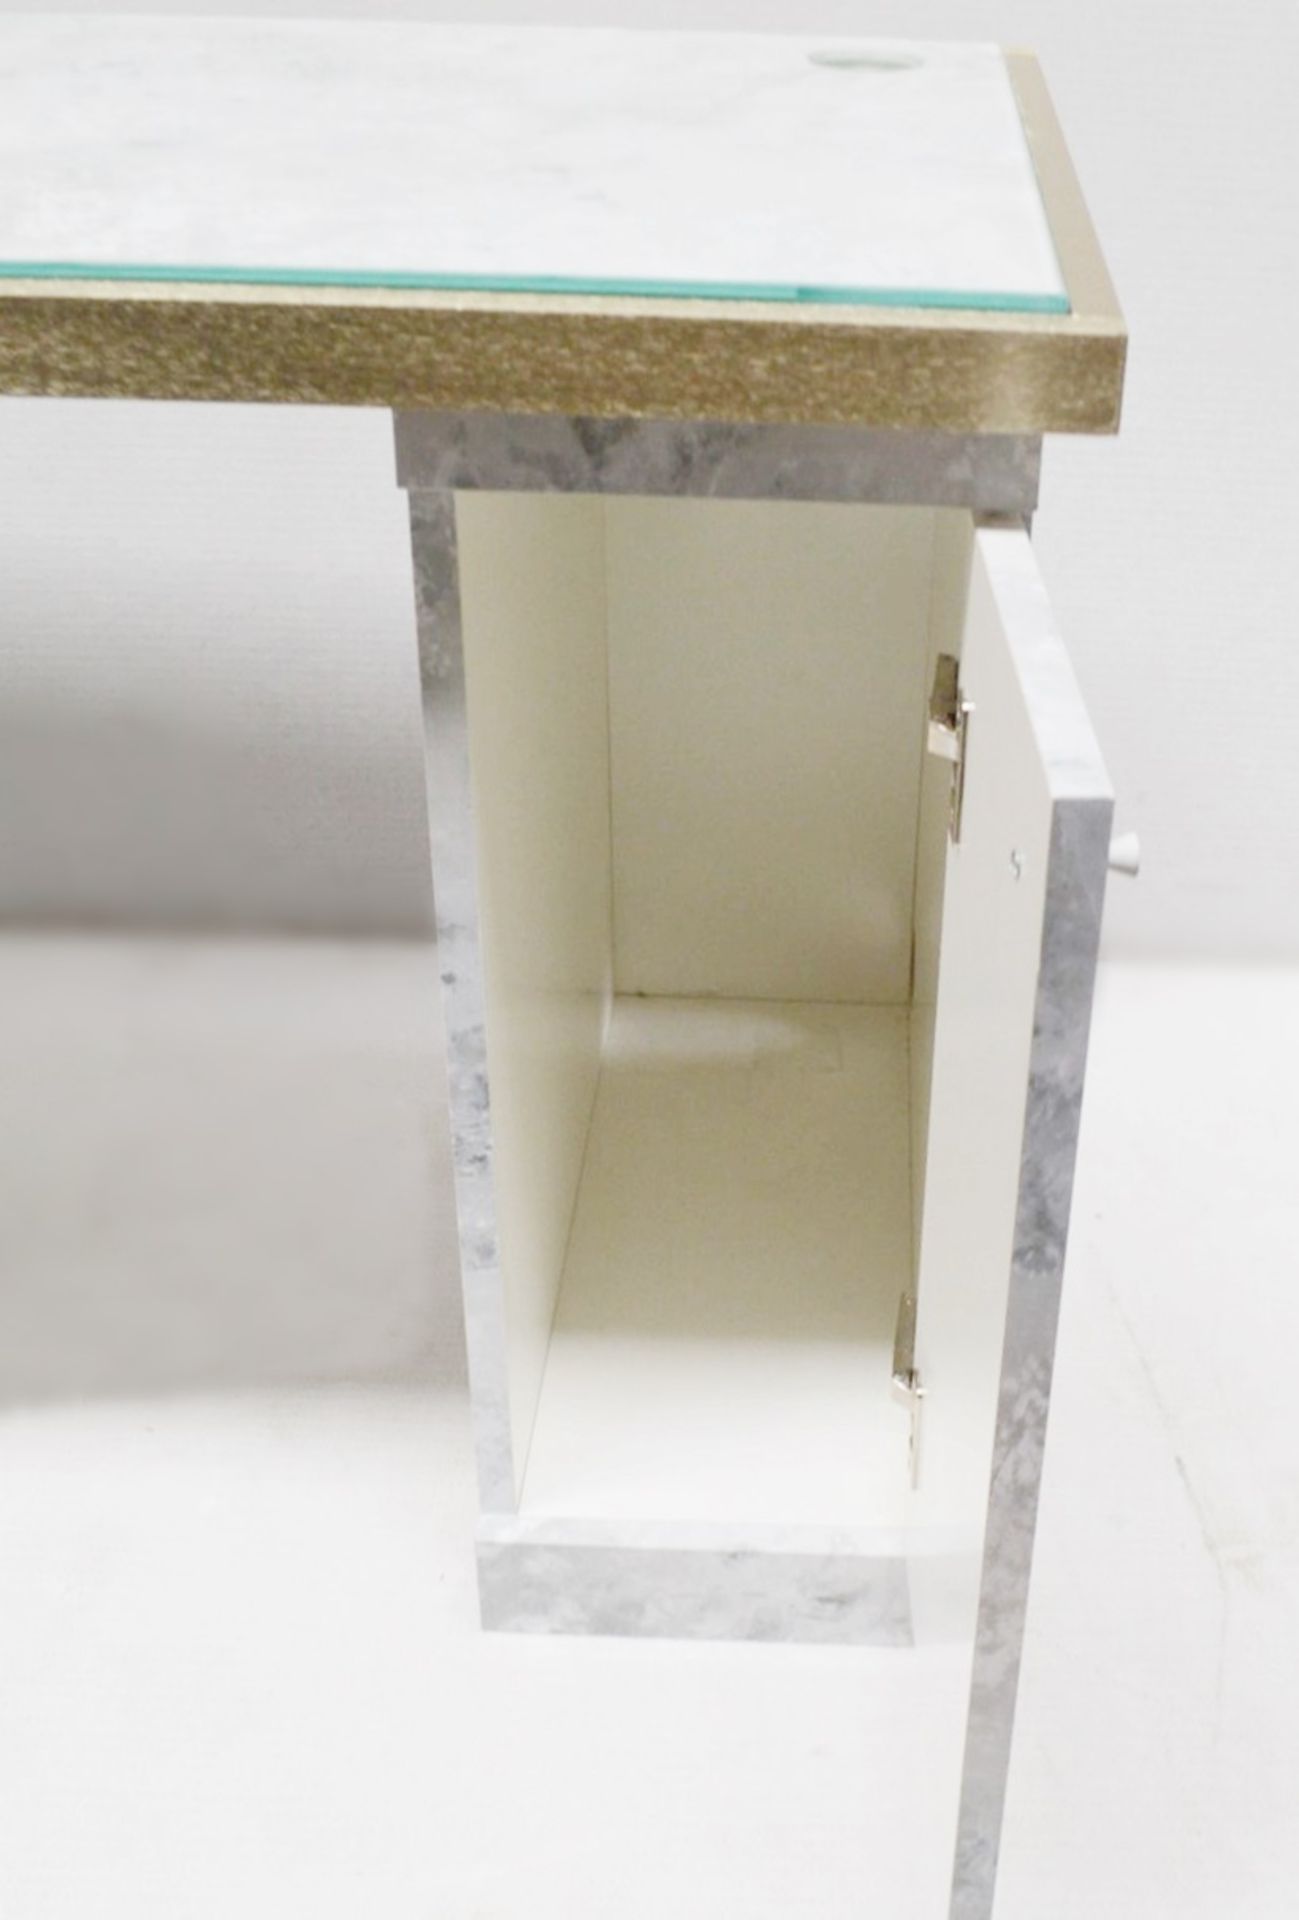 1 x BALDI Designer Retail Display Table / Desk Featuring A Marble Effect Aesthetic - Image 7 of 8